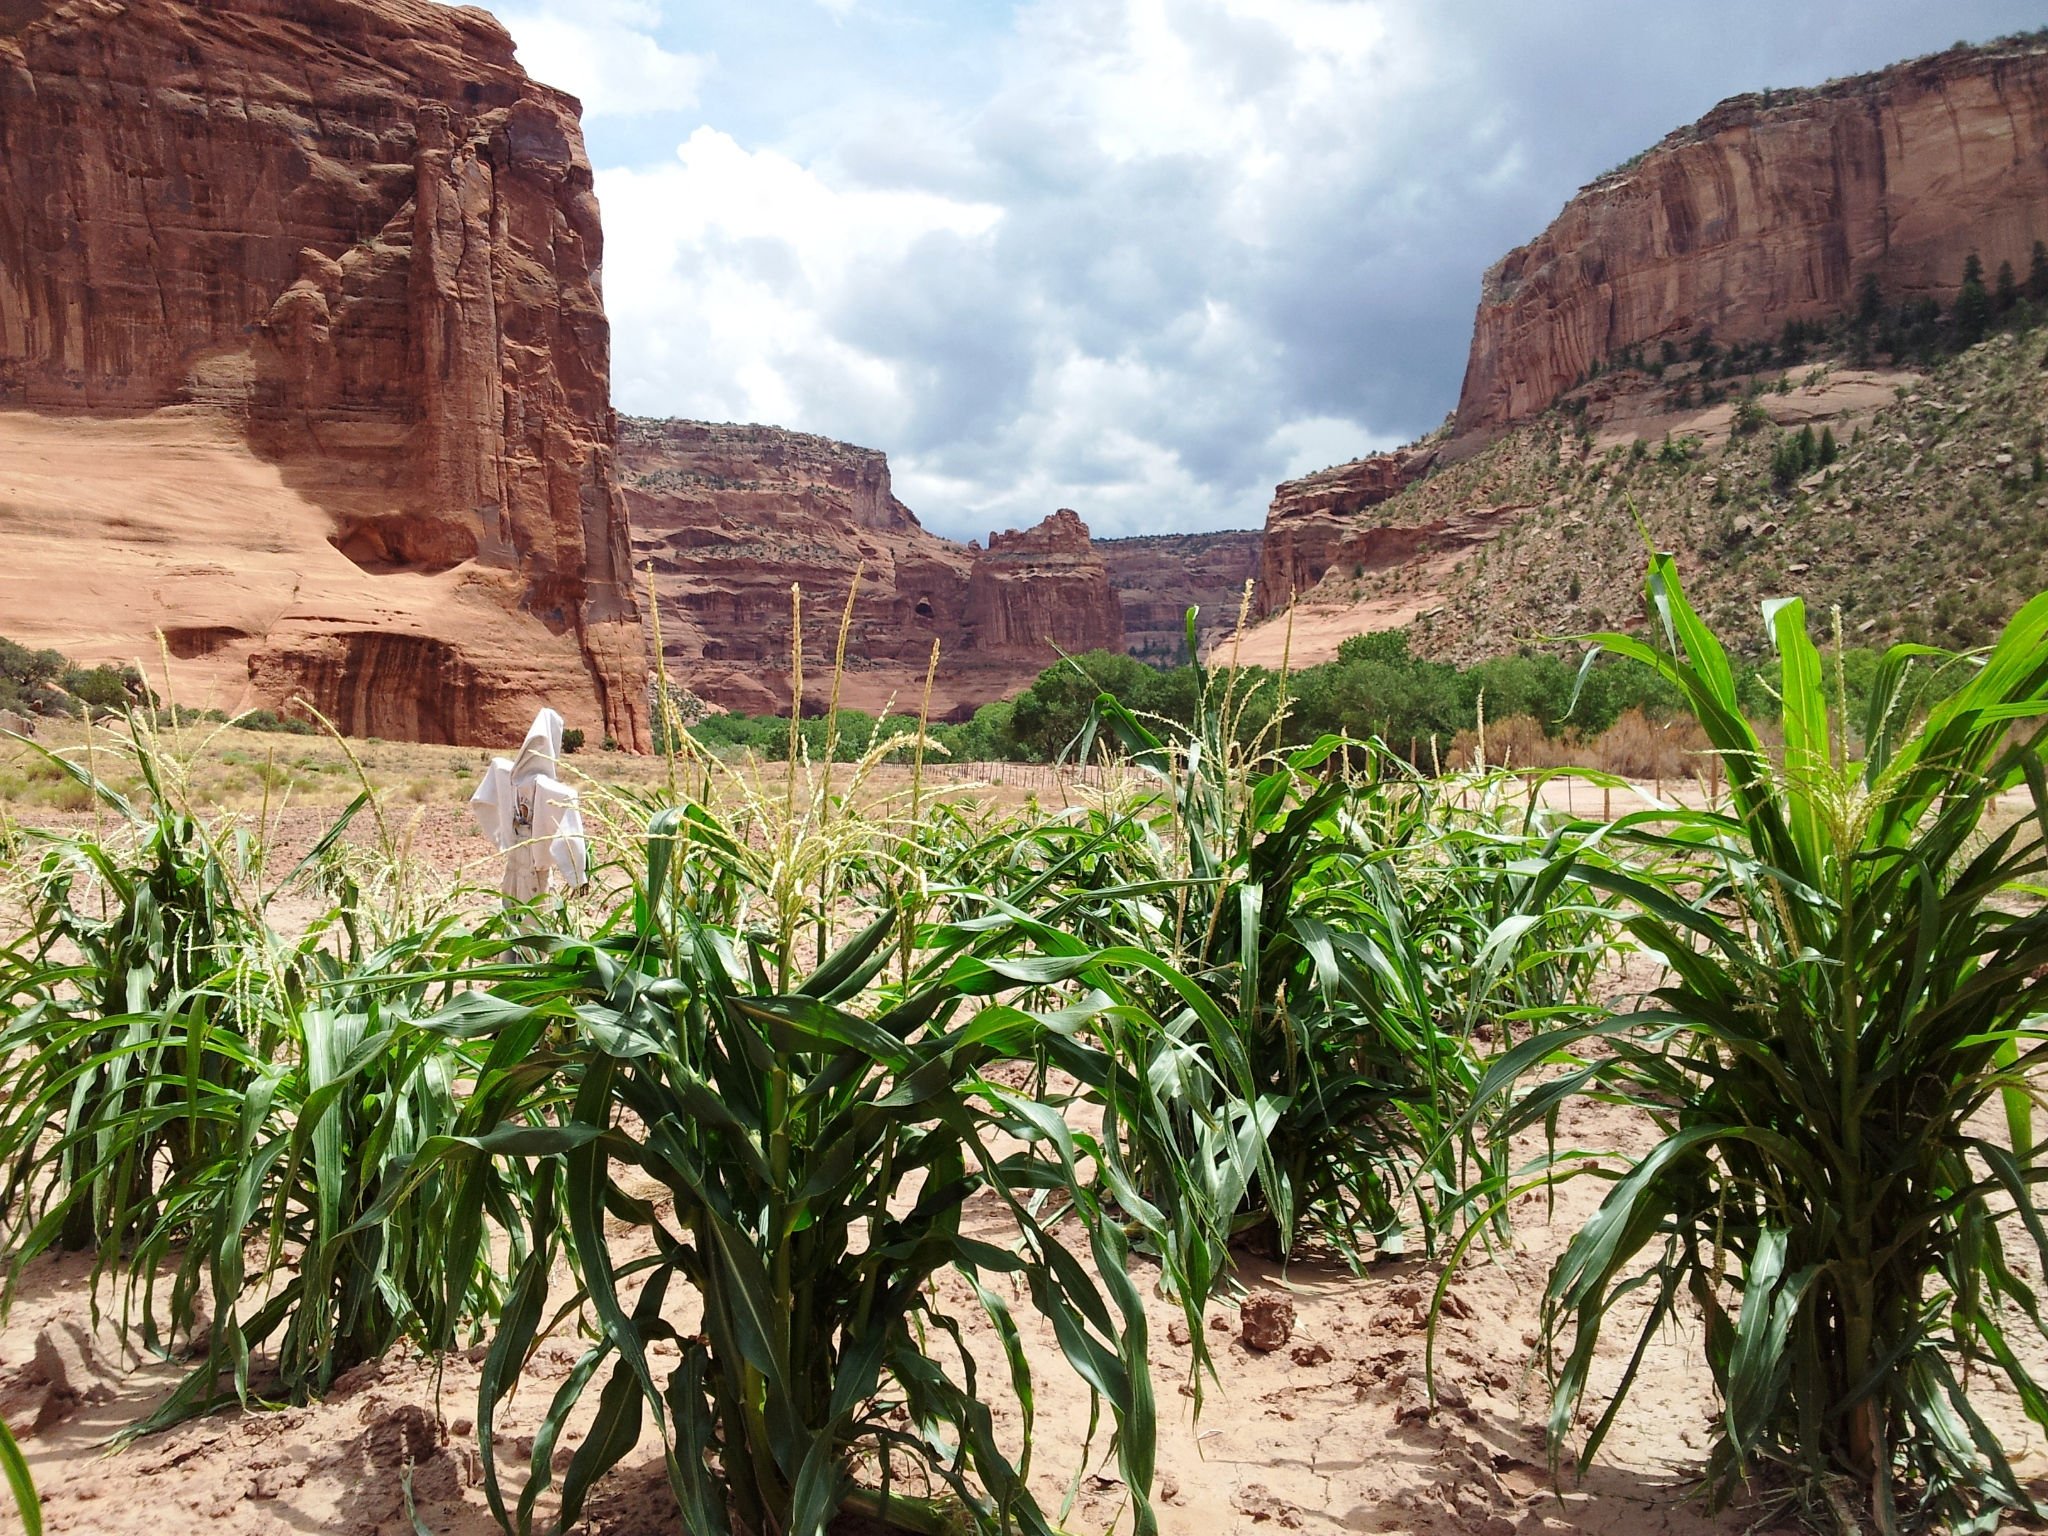 Navajo families continue to live and farm in the canyon they call Tsegi